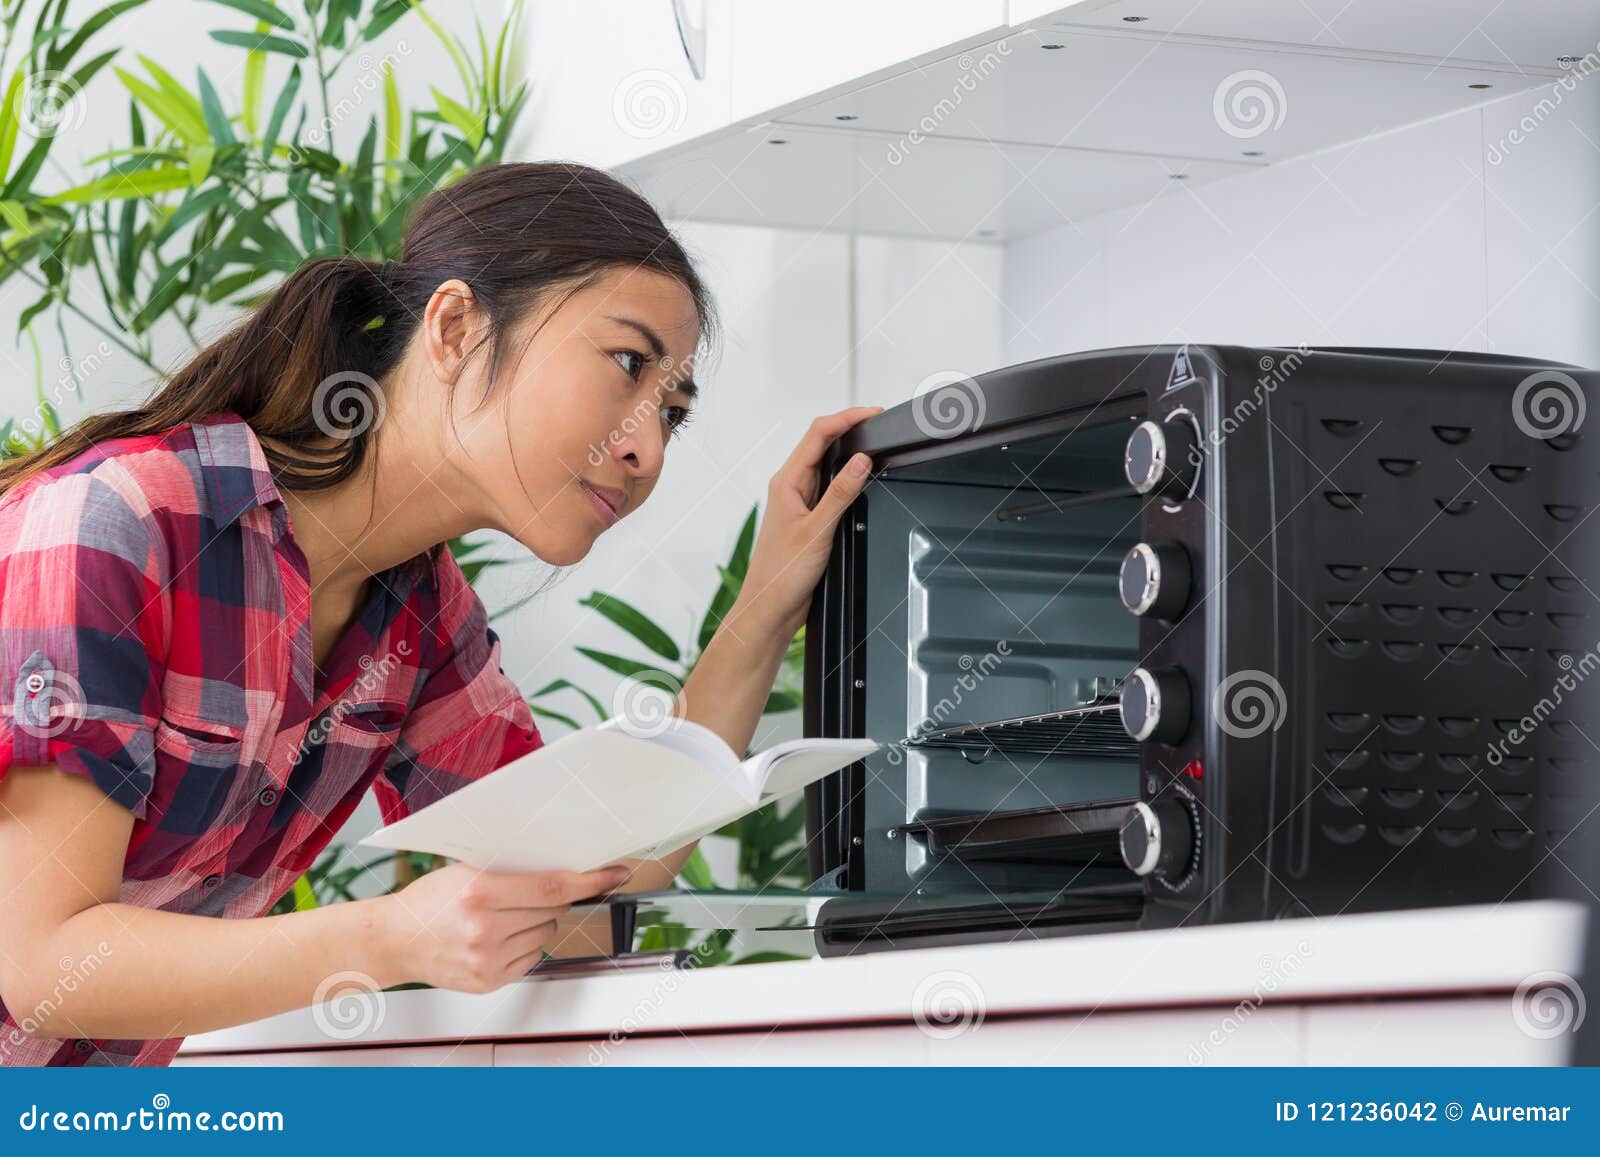 lady looking at countertop oven holding instructions